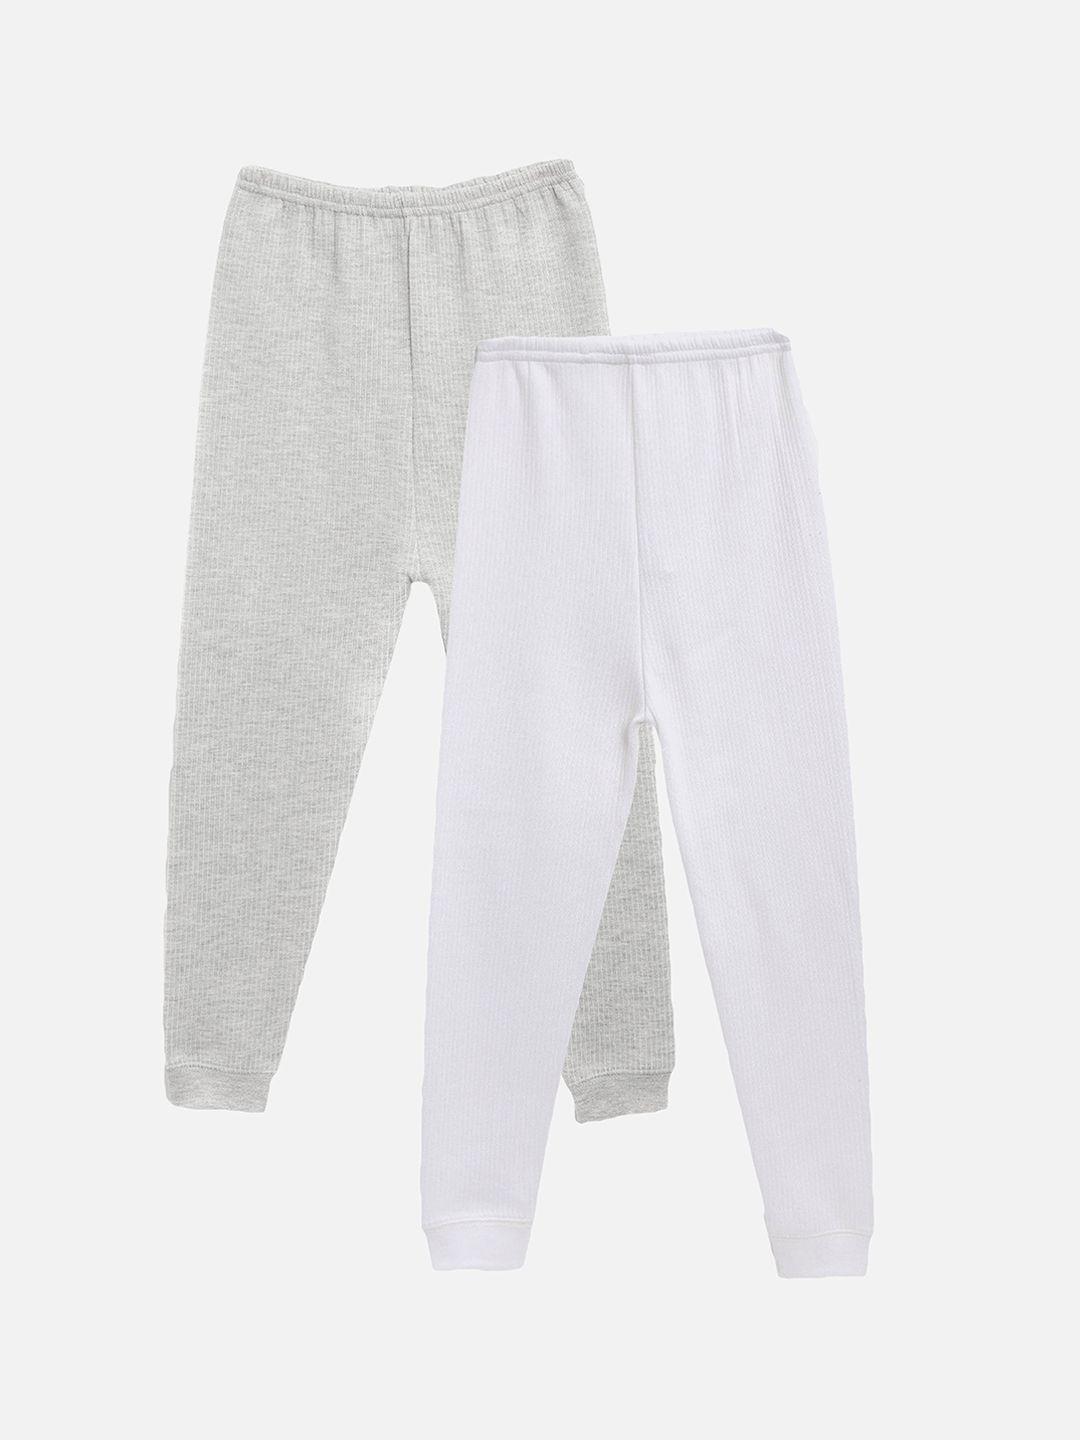 kanvin boys pack of 2 grey & white solid thermal bottoms